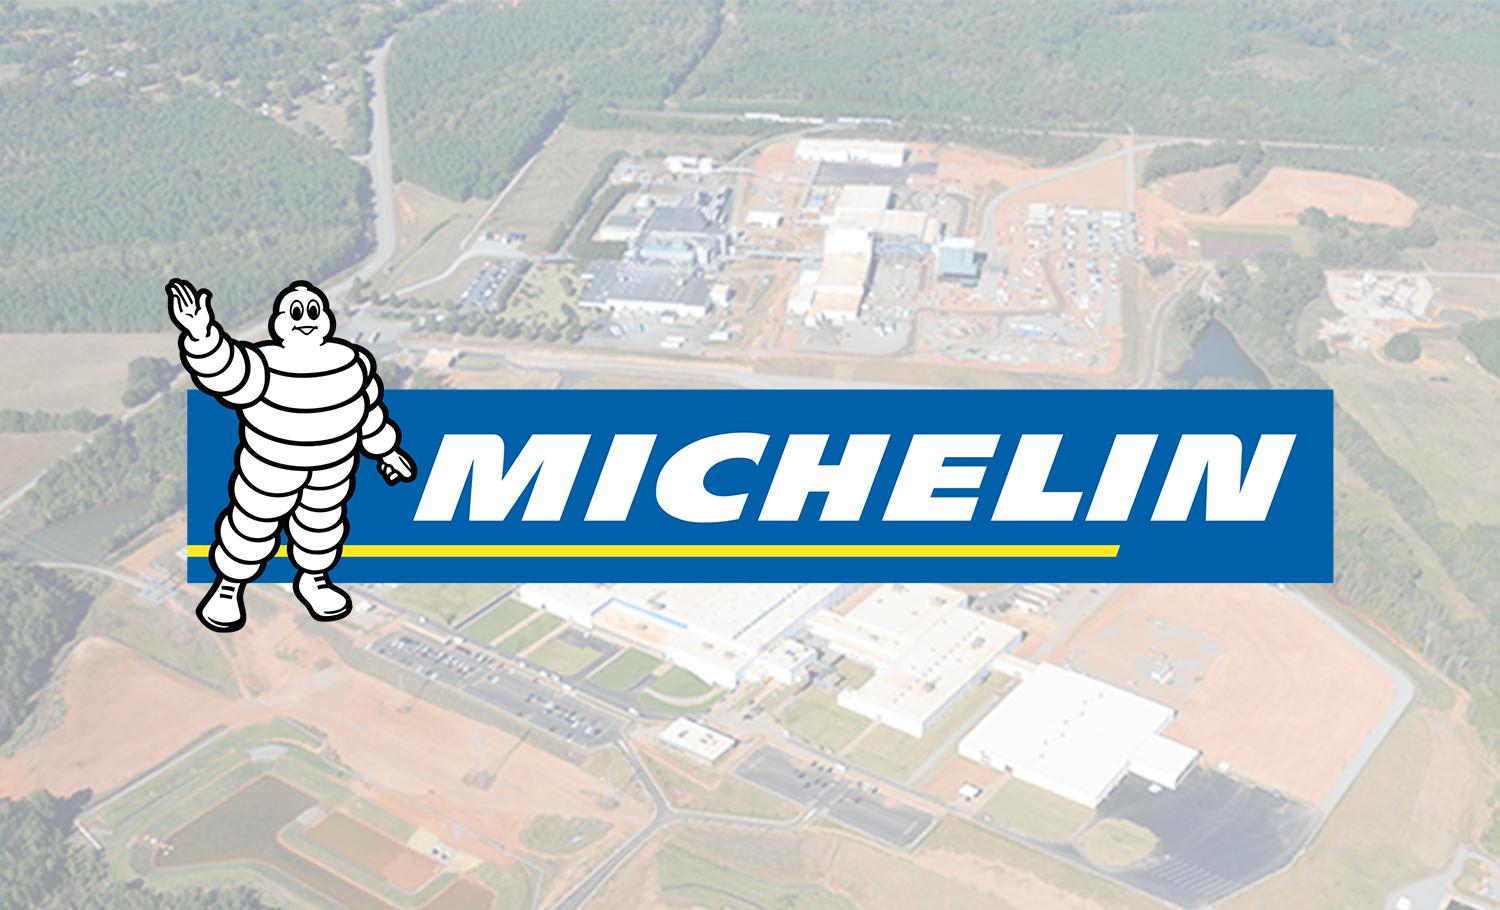 Product MICHELIN - Amteck image